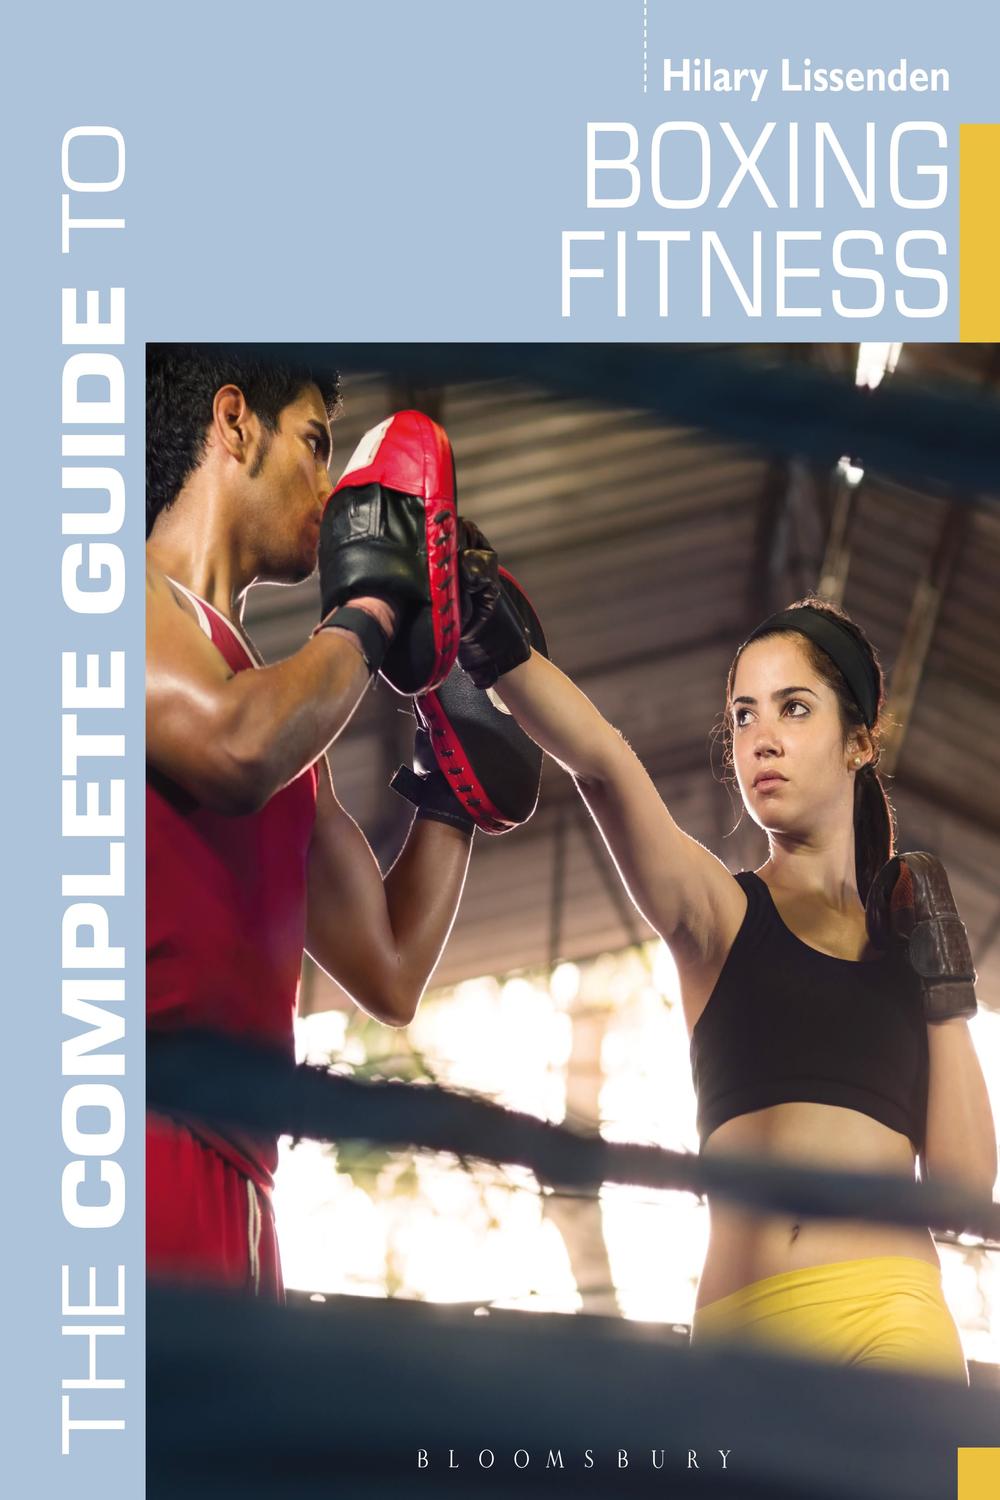 PDF The Complete Guide to Boxing Fitness by Hilary Lissenden eBook Perlego